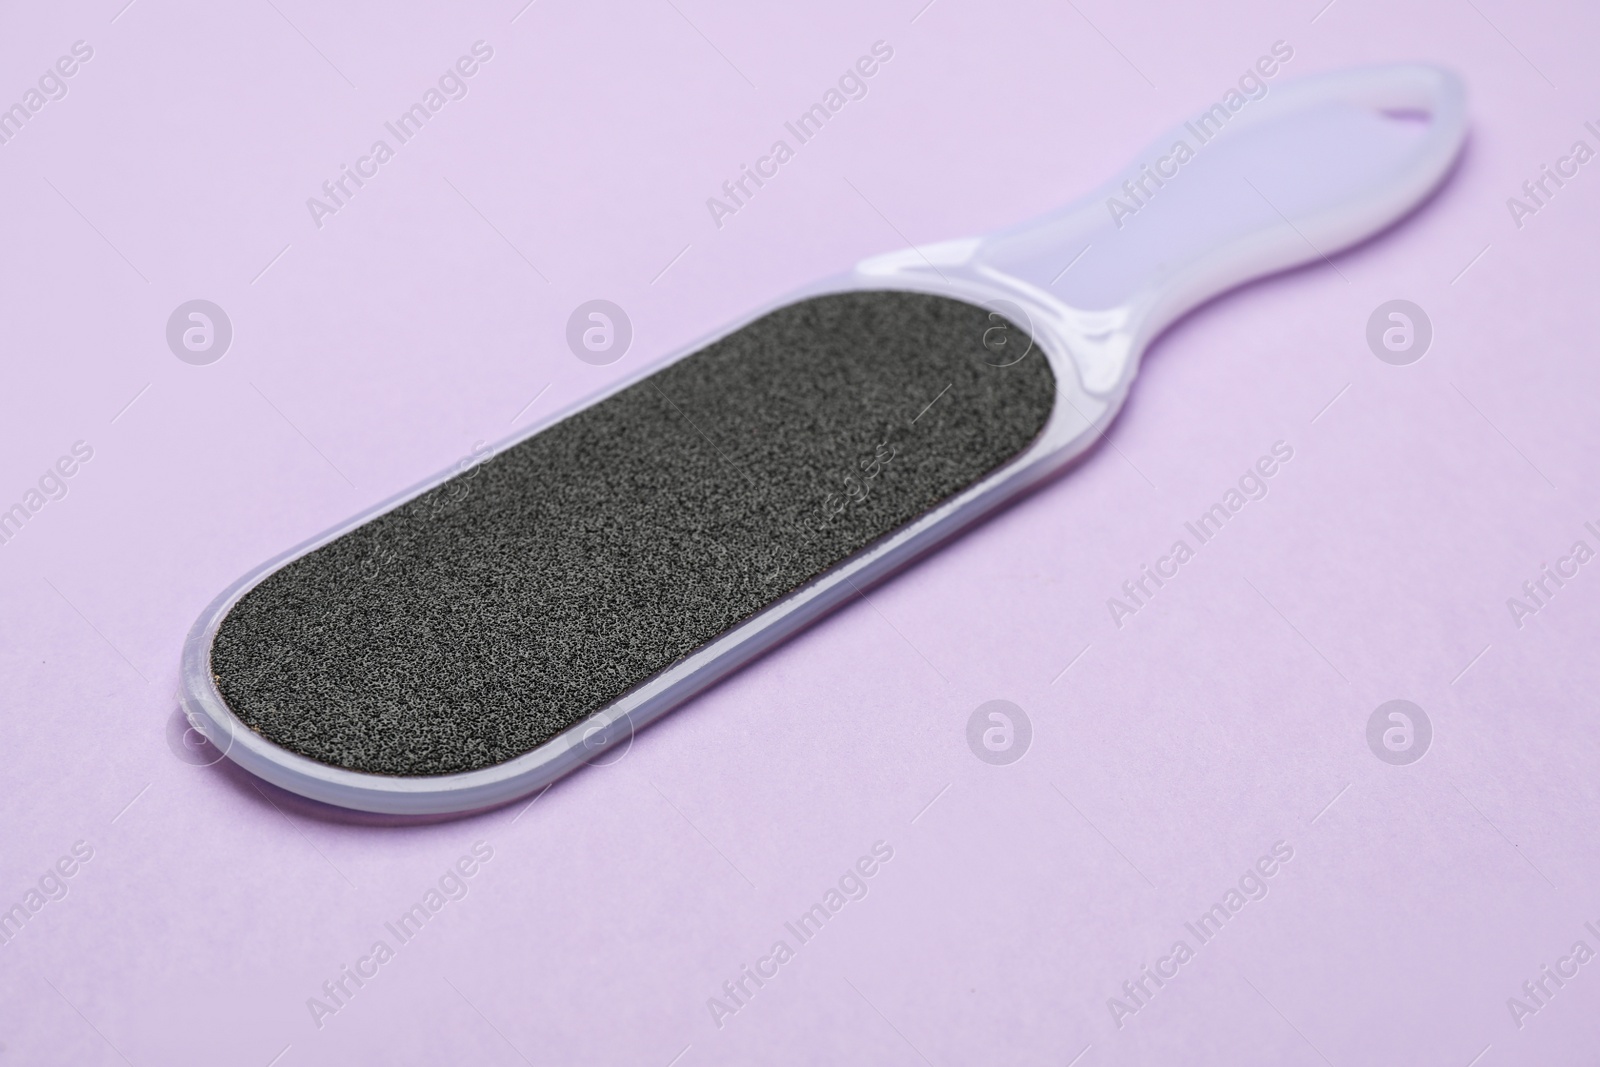 Photo of Foot file on violet background, closeup. Pedicure tool